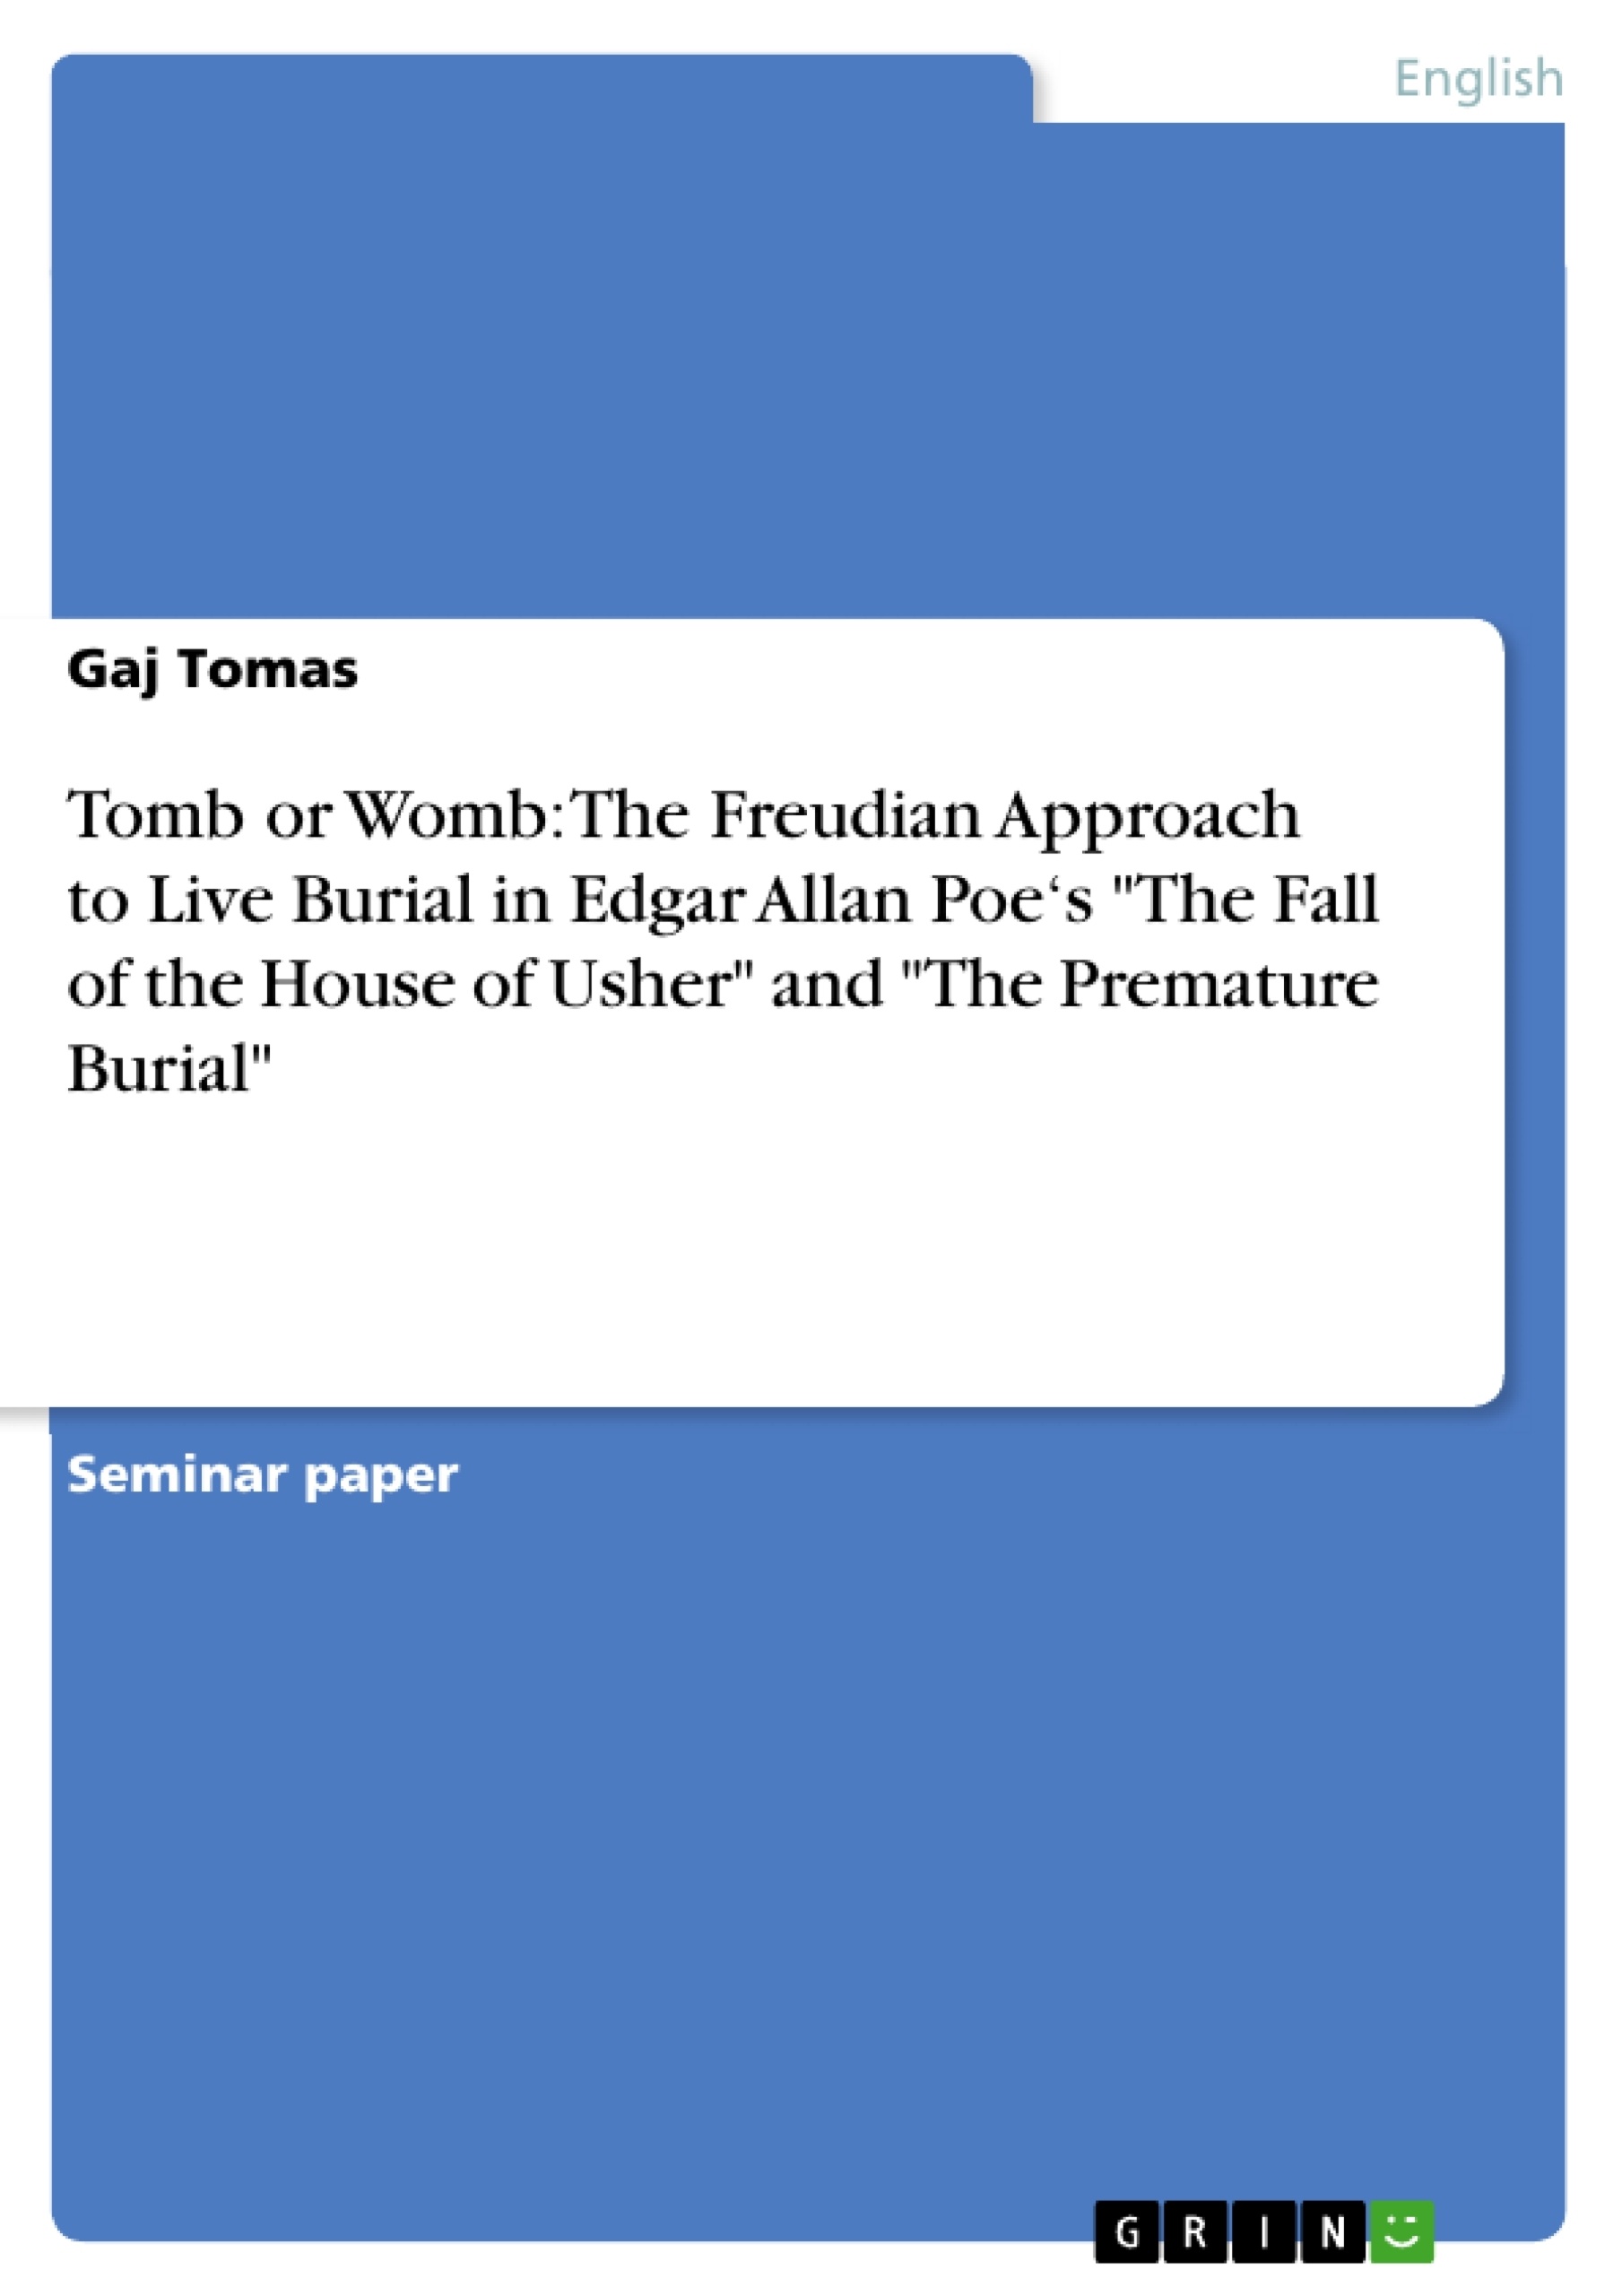 Title: Tomb or Womb: The Freudian Approach to Live Burial in Edgar Allan Poe‘s "The Fall of the House of Usher" and "The Premature Burial"